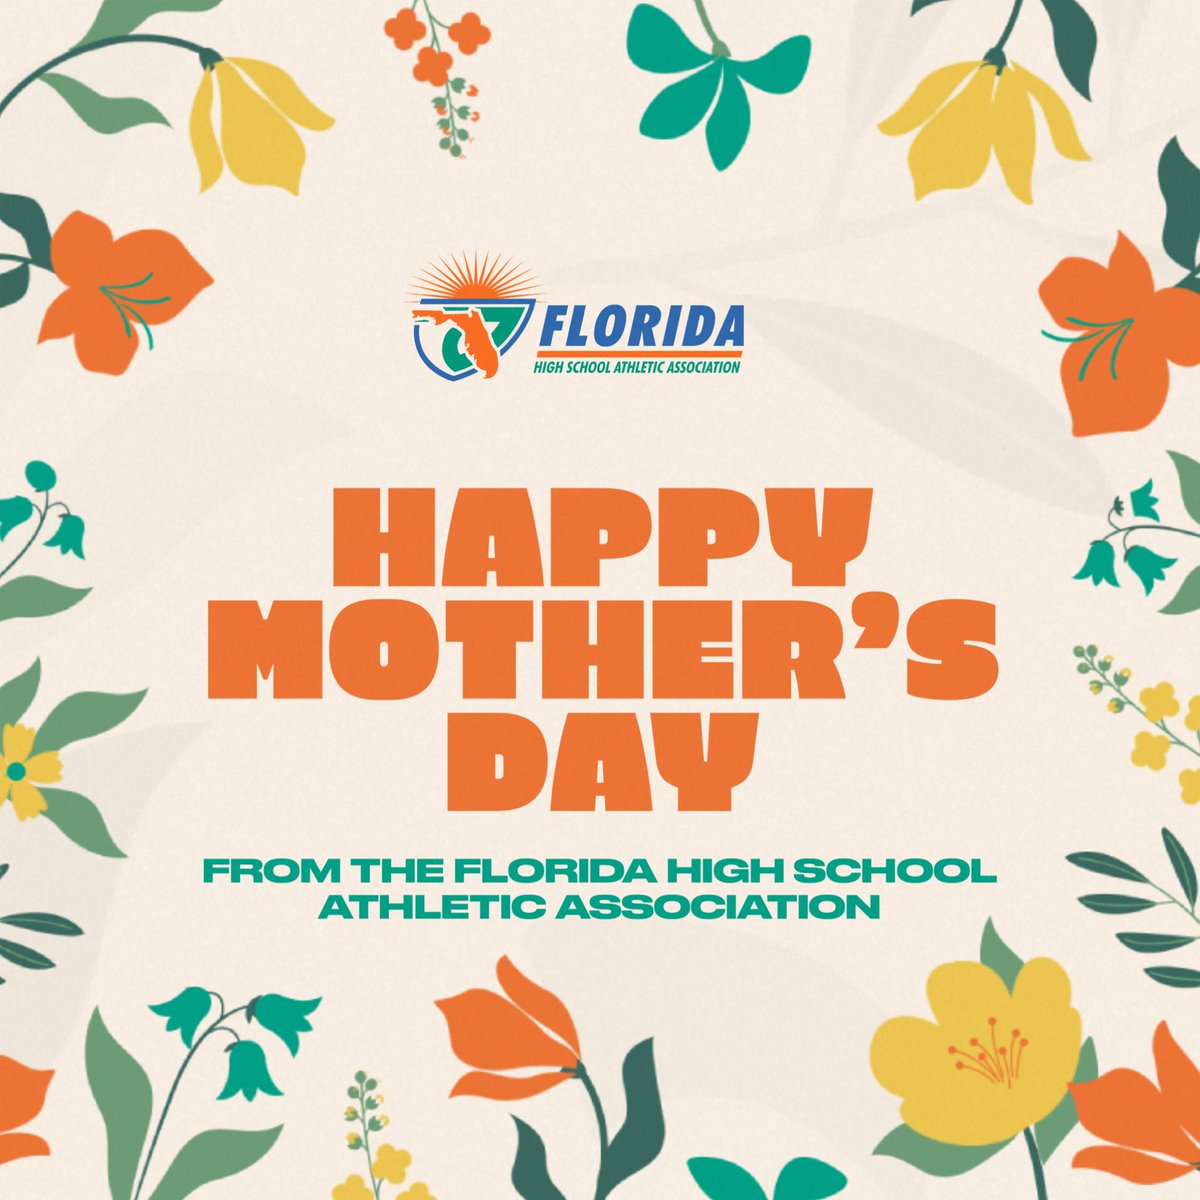 Happy Mother's Day to all the amazing moms out there! Your love, support, and dedication make all the difference. Thank you for everything you do. 💐#MothersDay #FHSAA